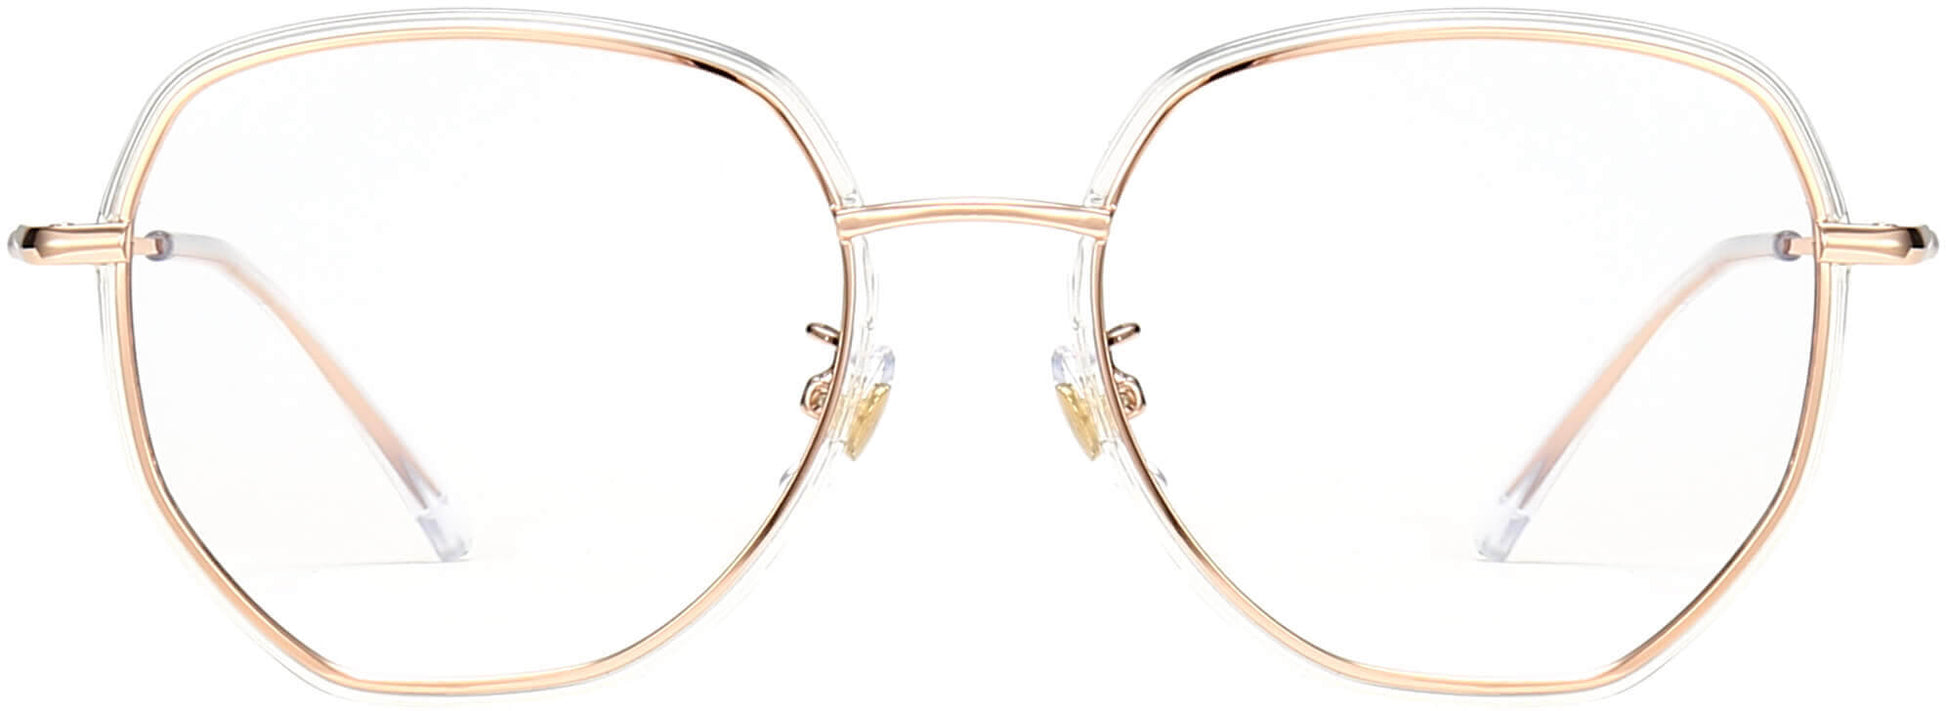 Riley Geometric Gold Eyeglasses from ANRRI, front view